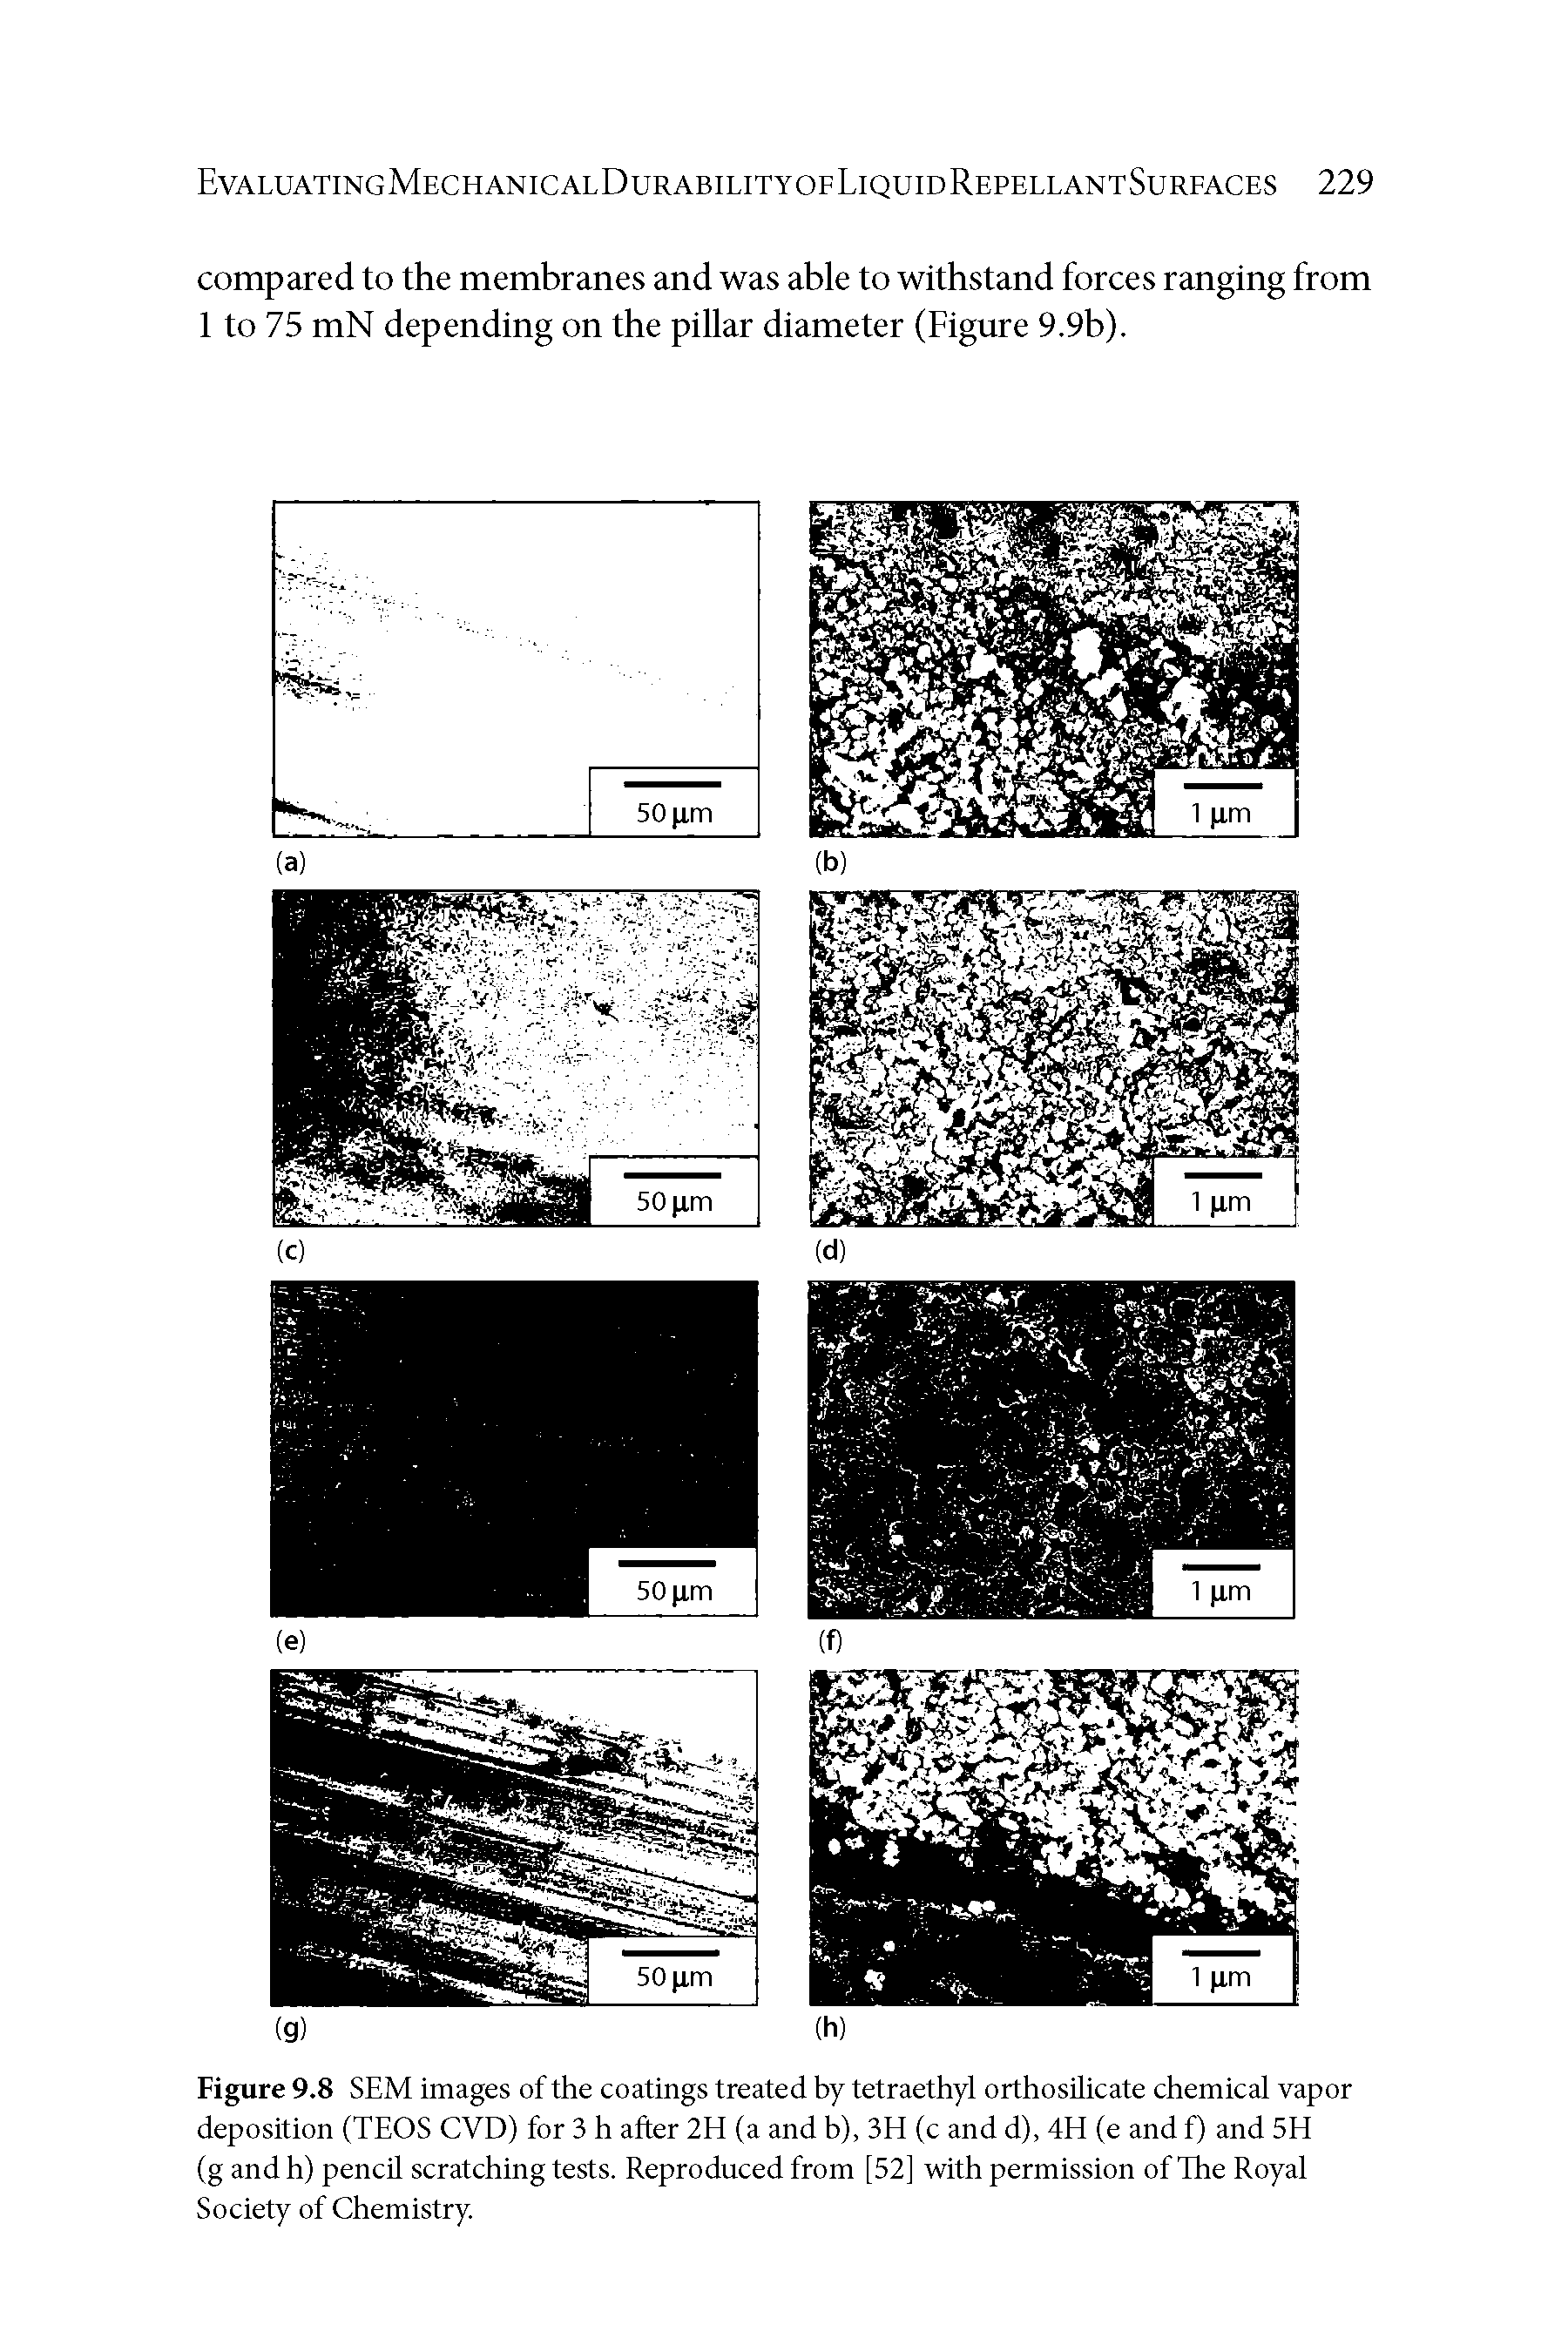 Figure 9.8 SEM images of the coatings treated by tetraethyl orthosUicate chemical vapor deposition (TEOS CVD) for 3 h after 2EI (a and b), 3EI (c and d), 4EI (e and f) and 5EI (g and h) pencil scratching tests. Reproduced from [52] with permission of The Royal Society of Chemistry.